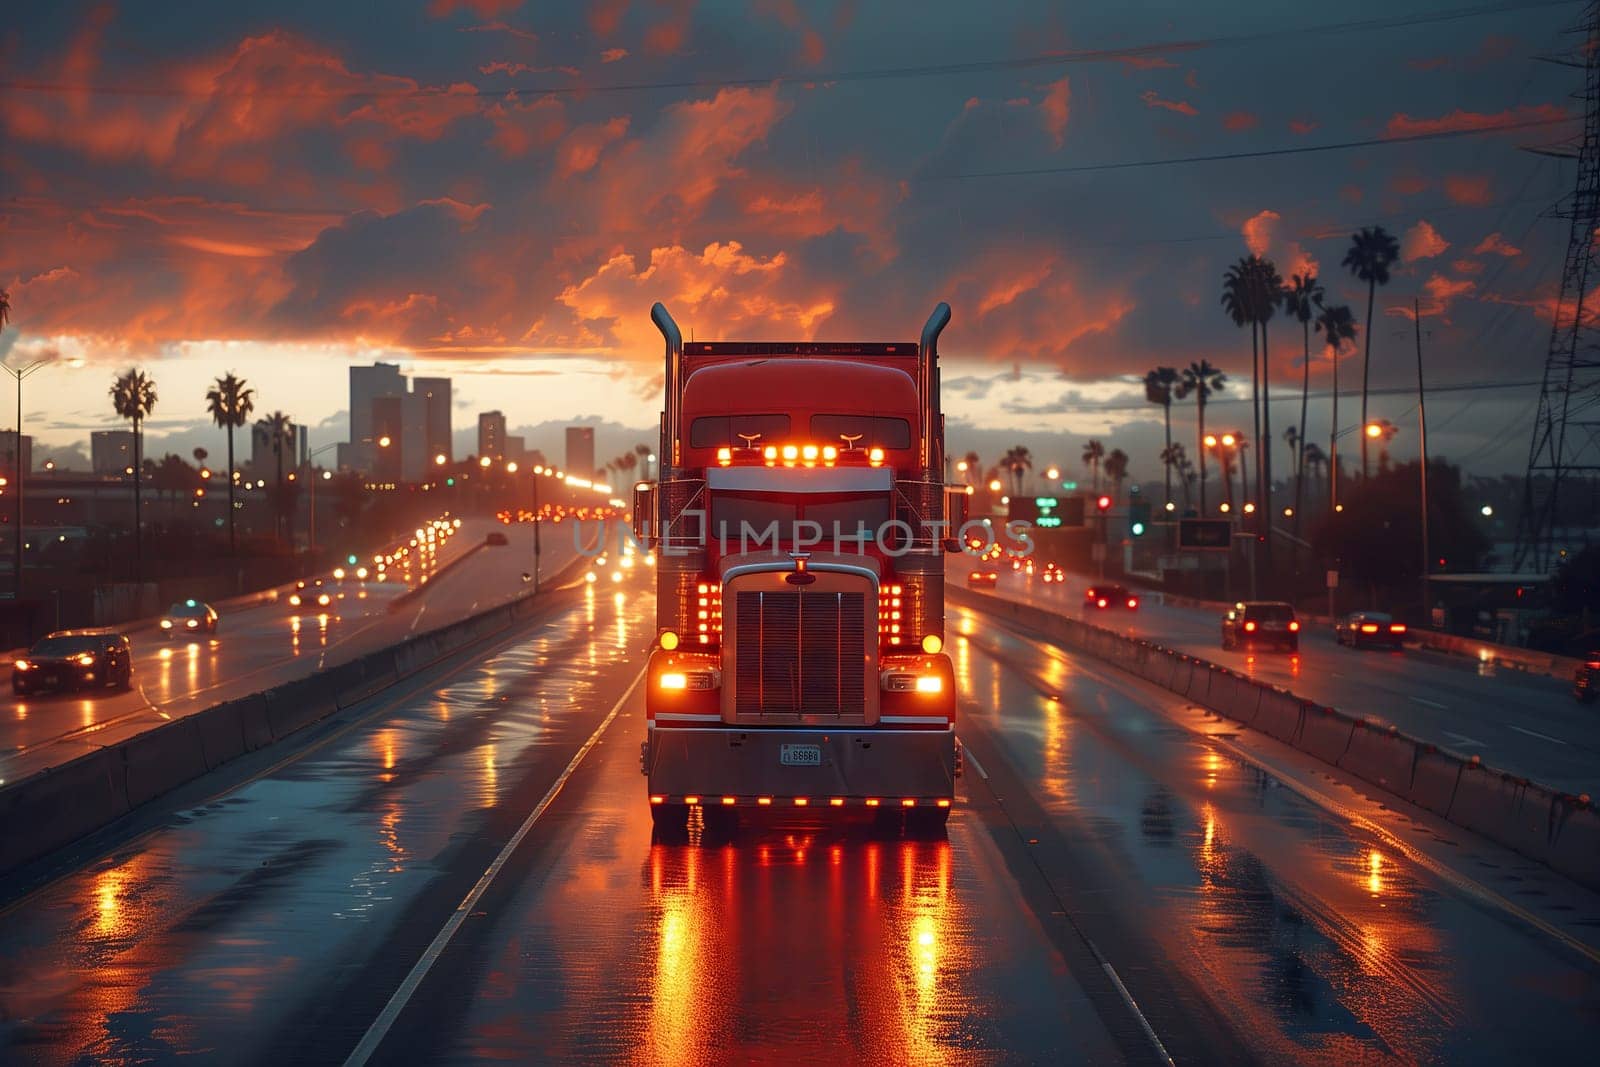 An automotive lighting semi truck is cruising down the asphalt highway at dusk, under the cloudy sky, passing by buildings and water, with the horizon in the distance